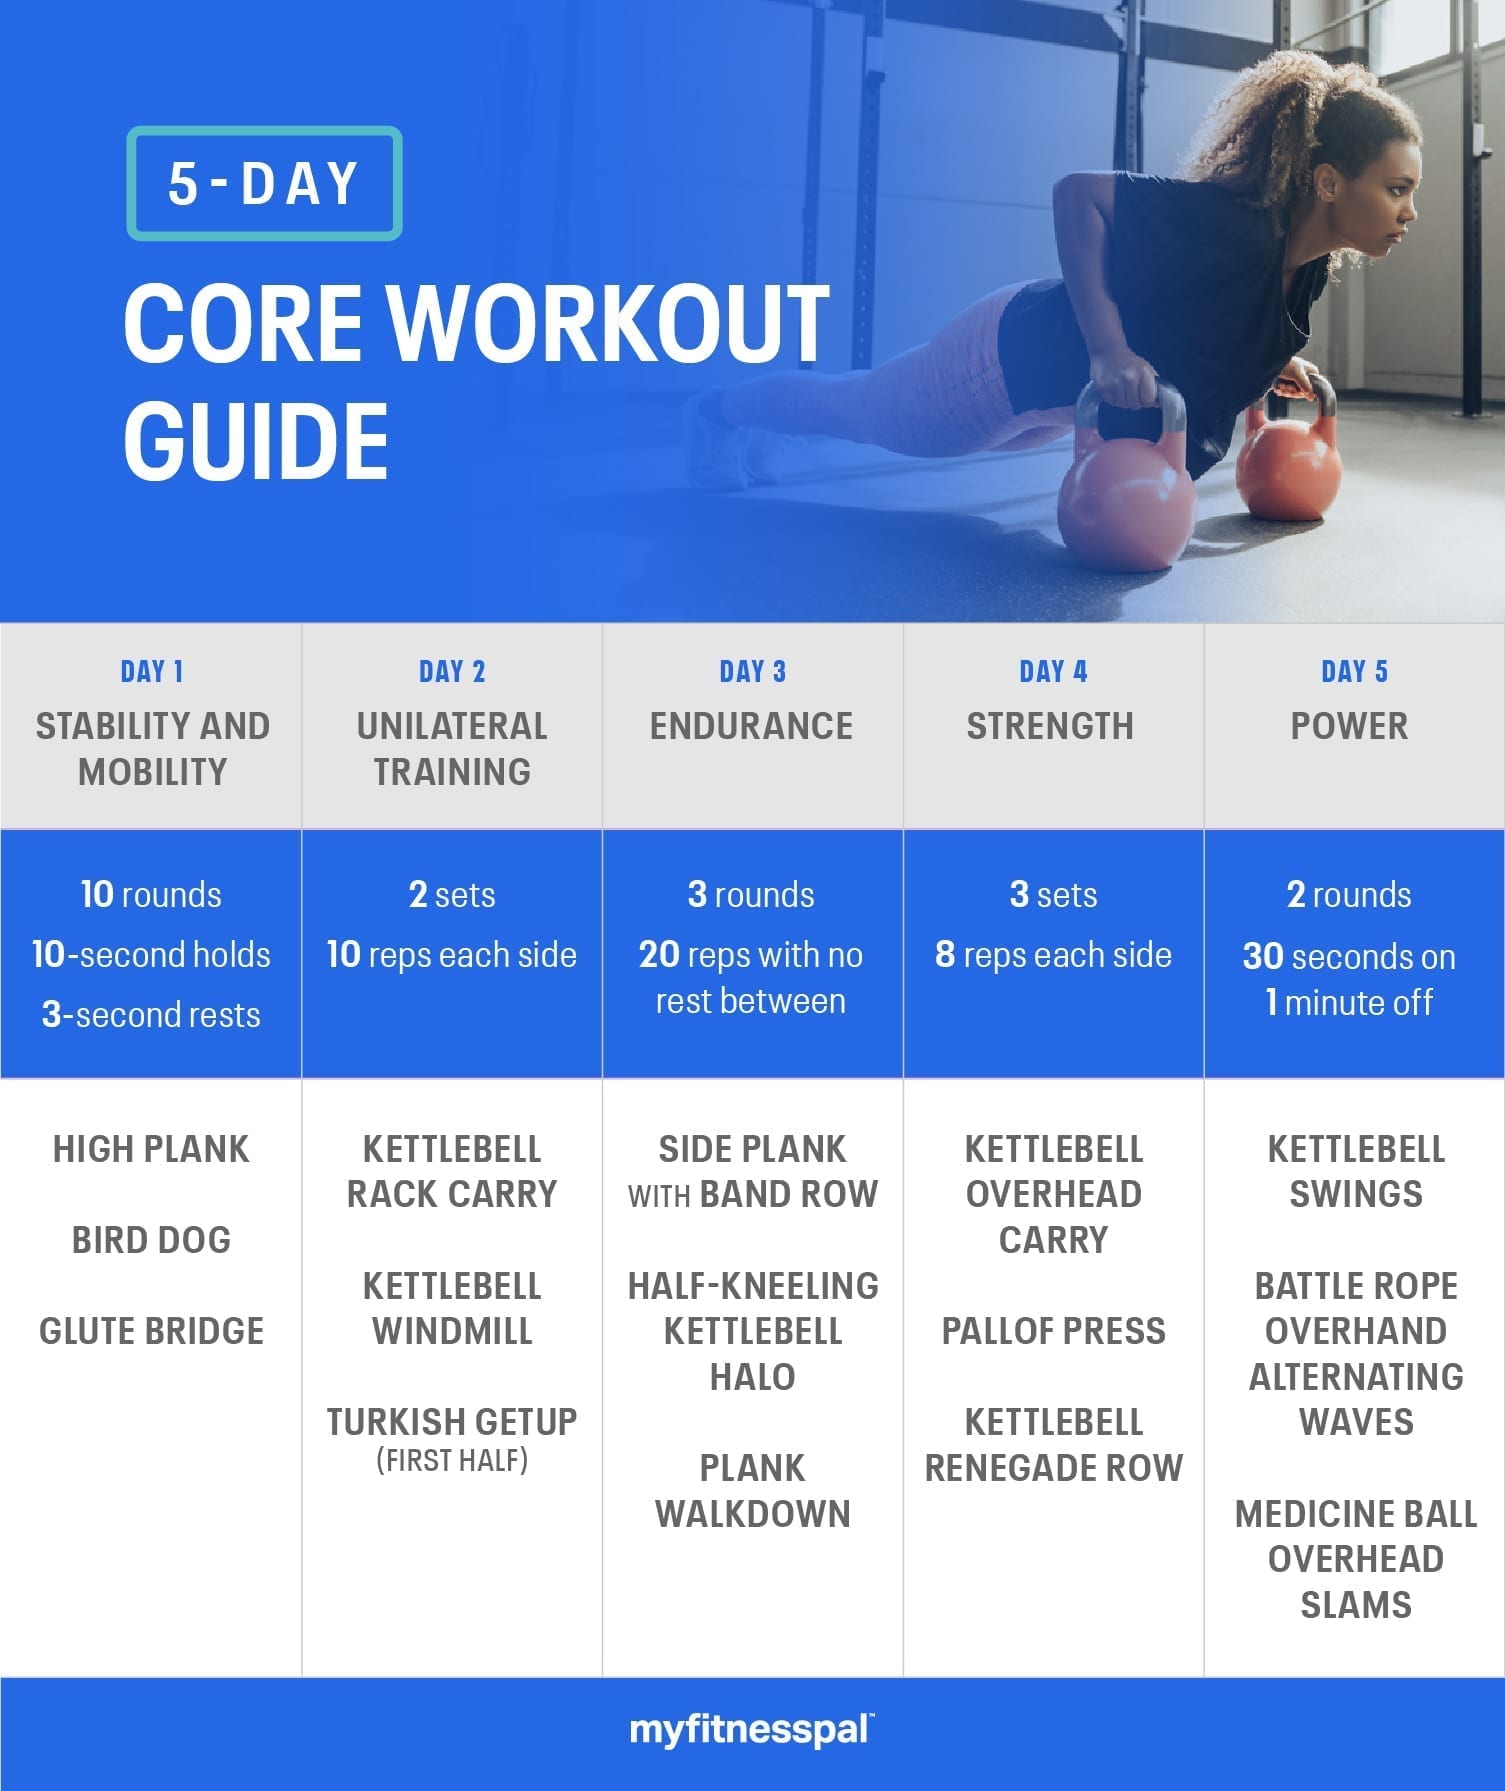 5-Day Core Workout Guide